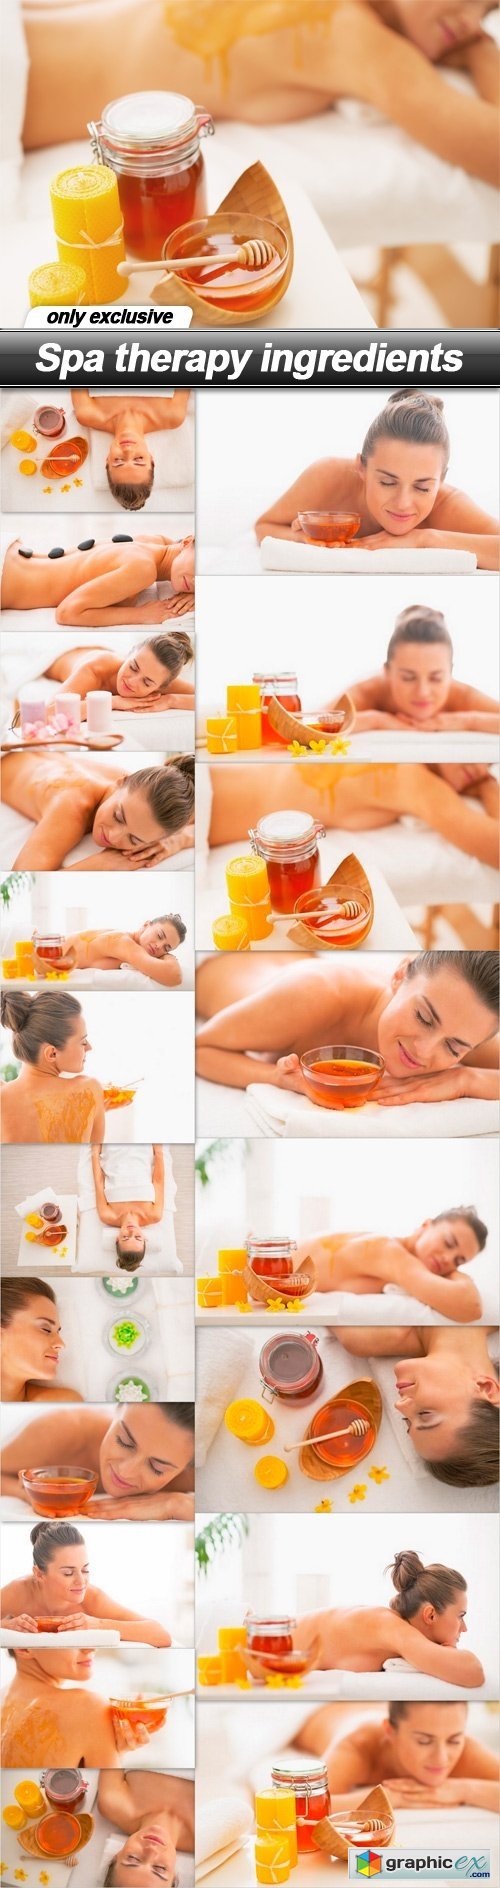 Spa therapy ingredients - 20 UHQ JPEG